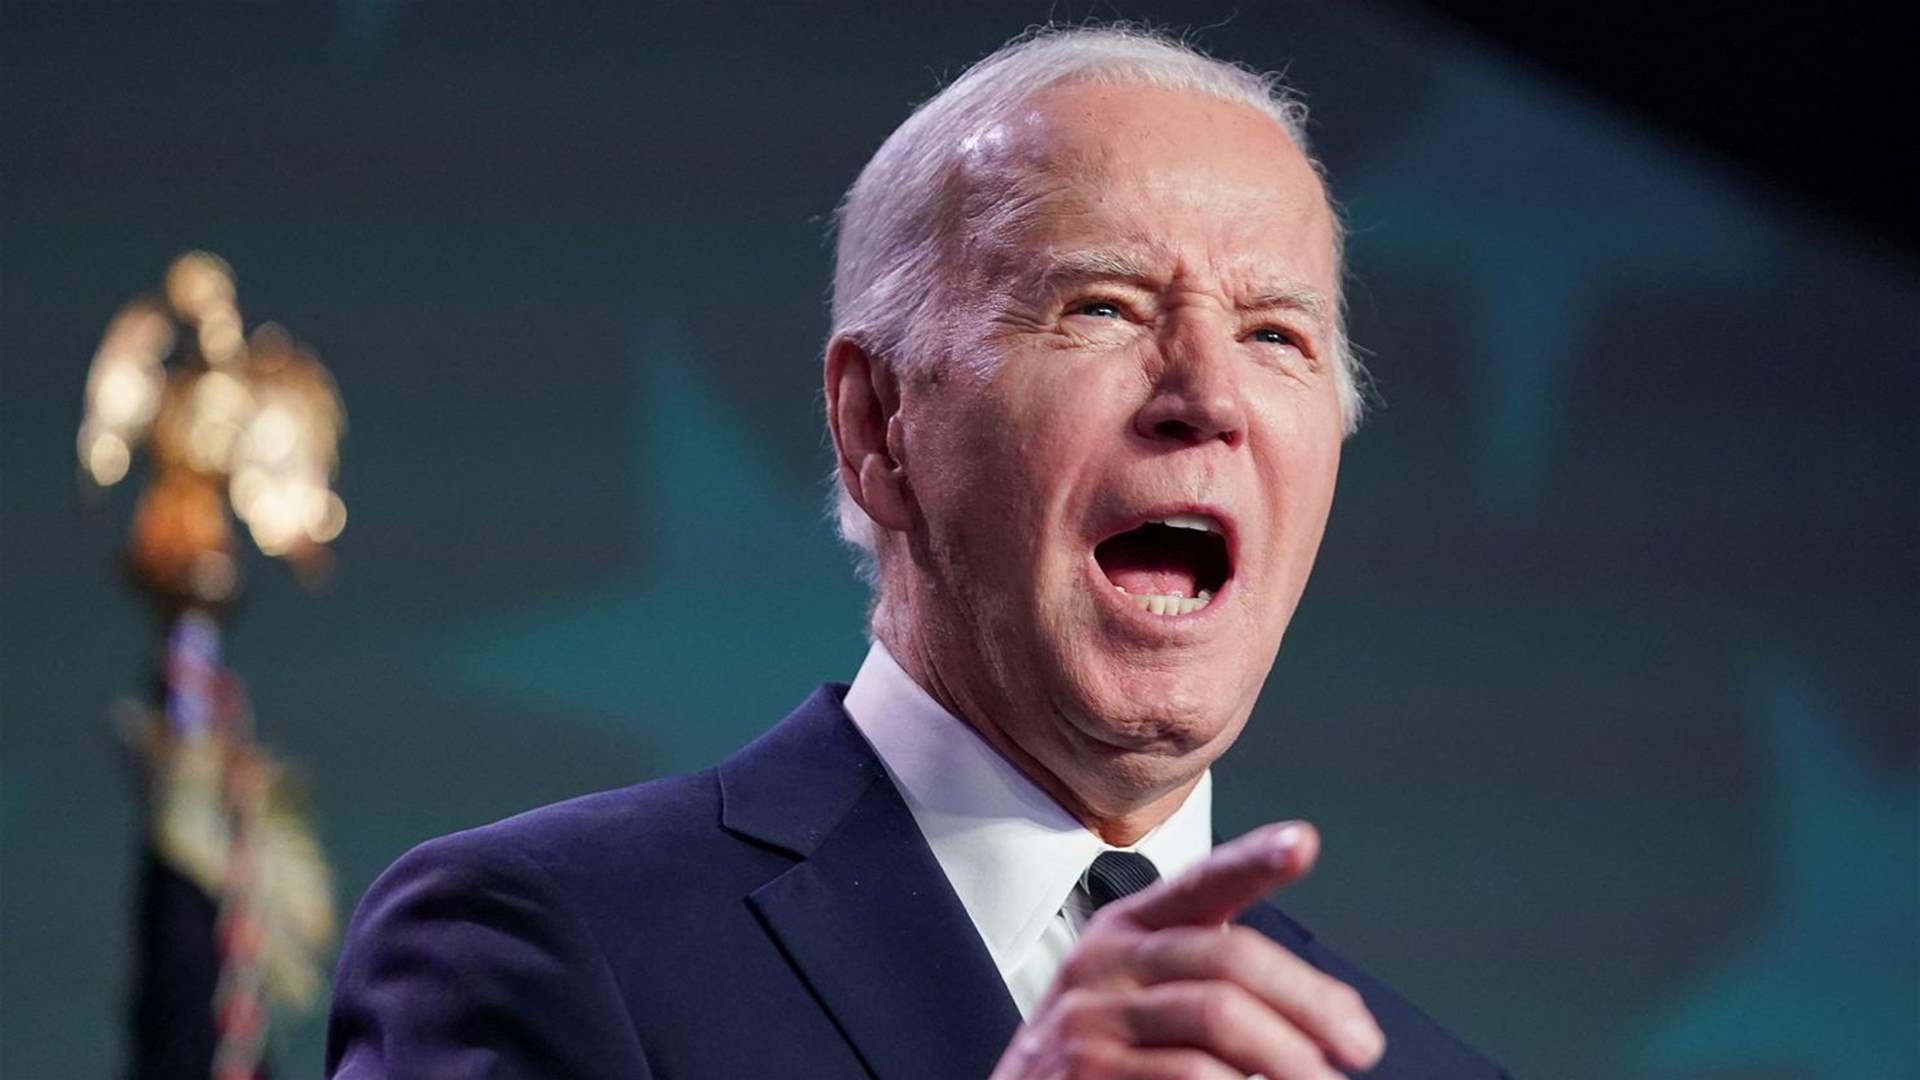 Biden: If Putin does not pay the price for the death and destruction he causes, he will continue